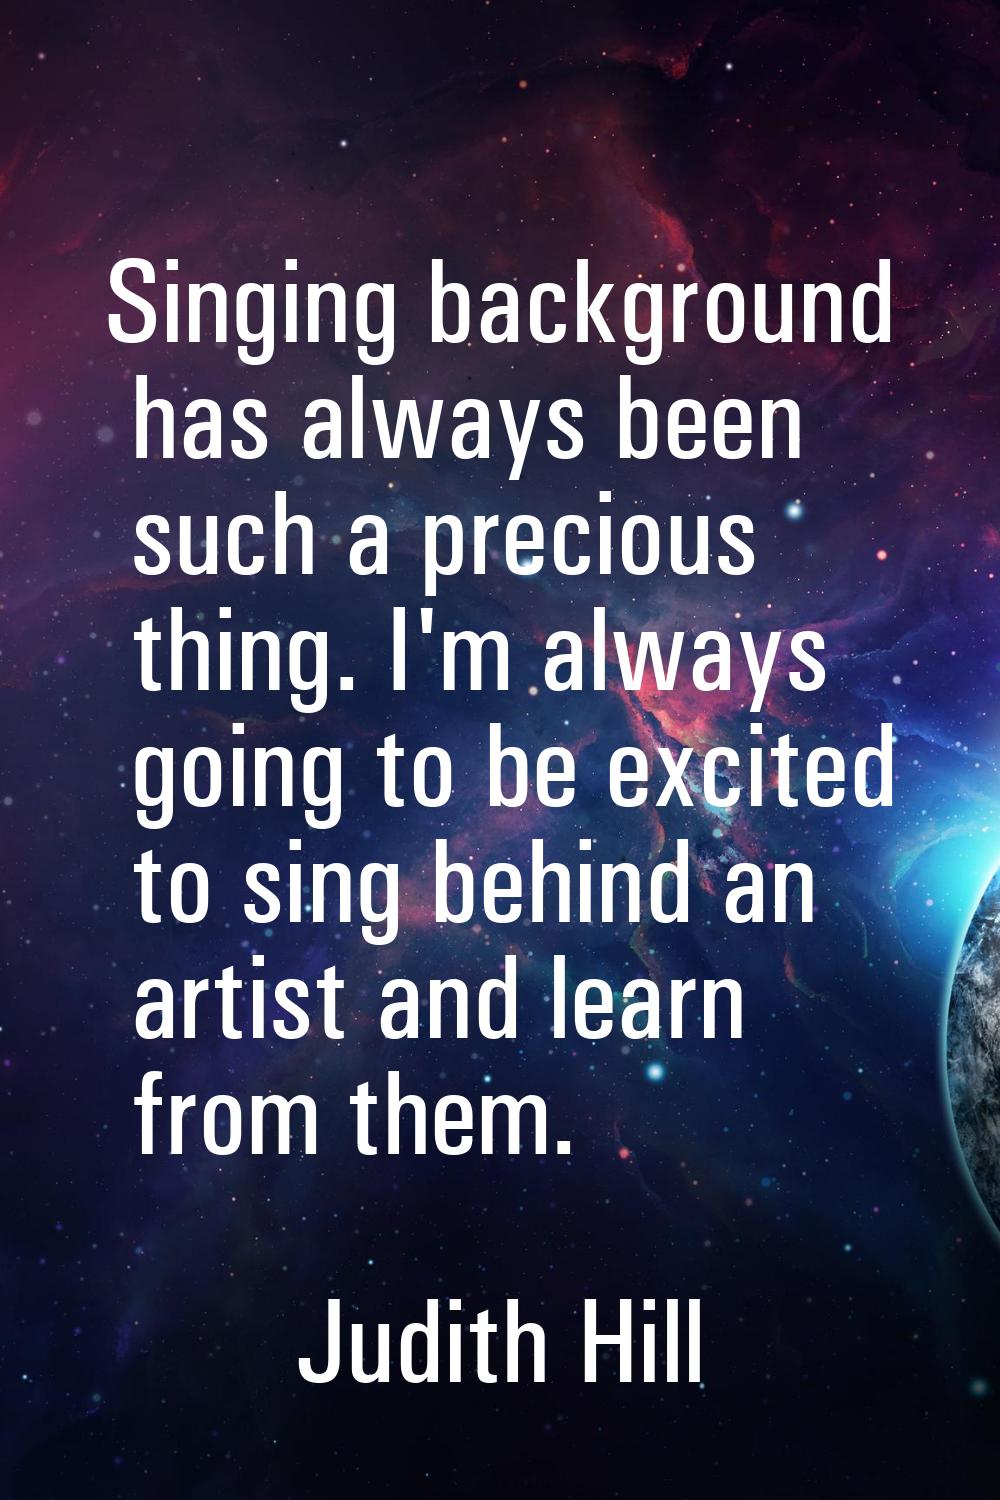 Singing background has always been such a precious thing. I'm always going to be excited to sing be